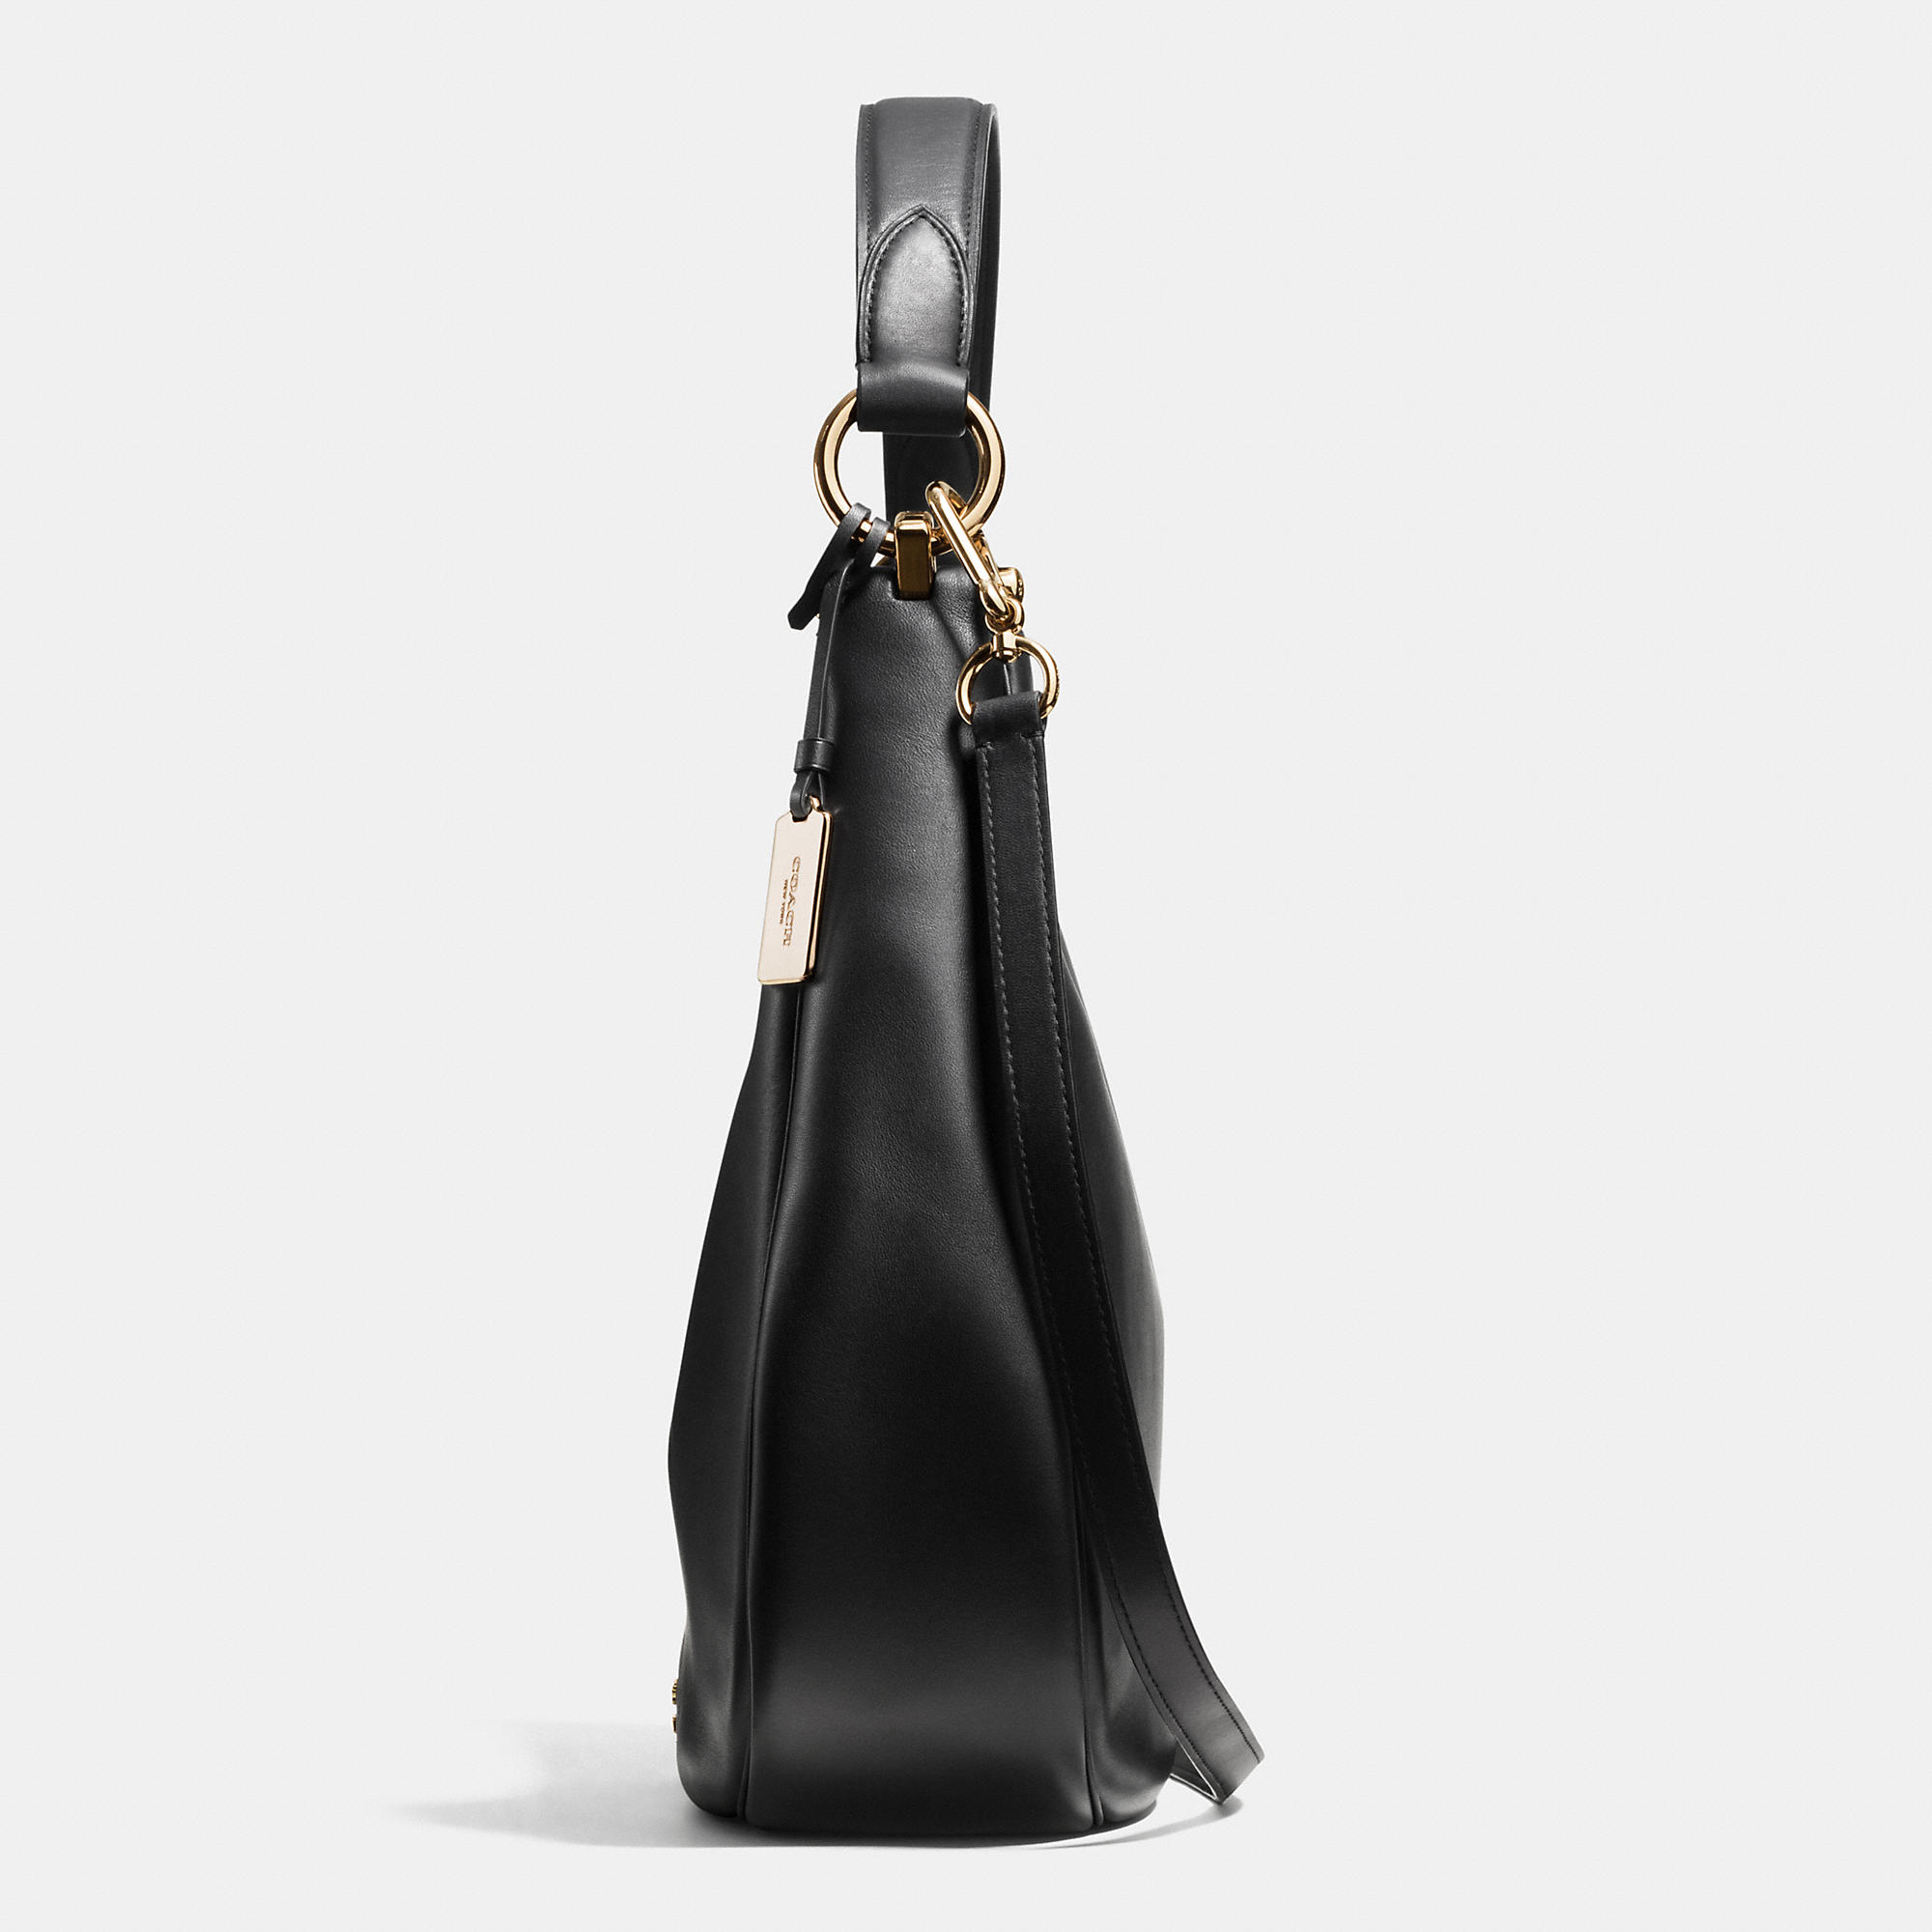 Luxury Brand Coach Nomad Hobo In Glovetanned Leather